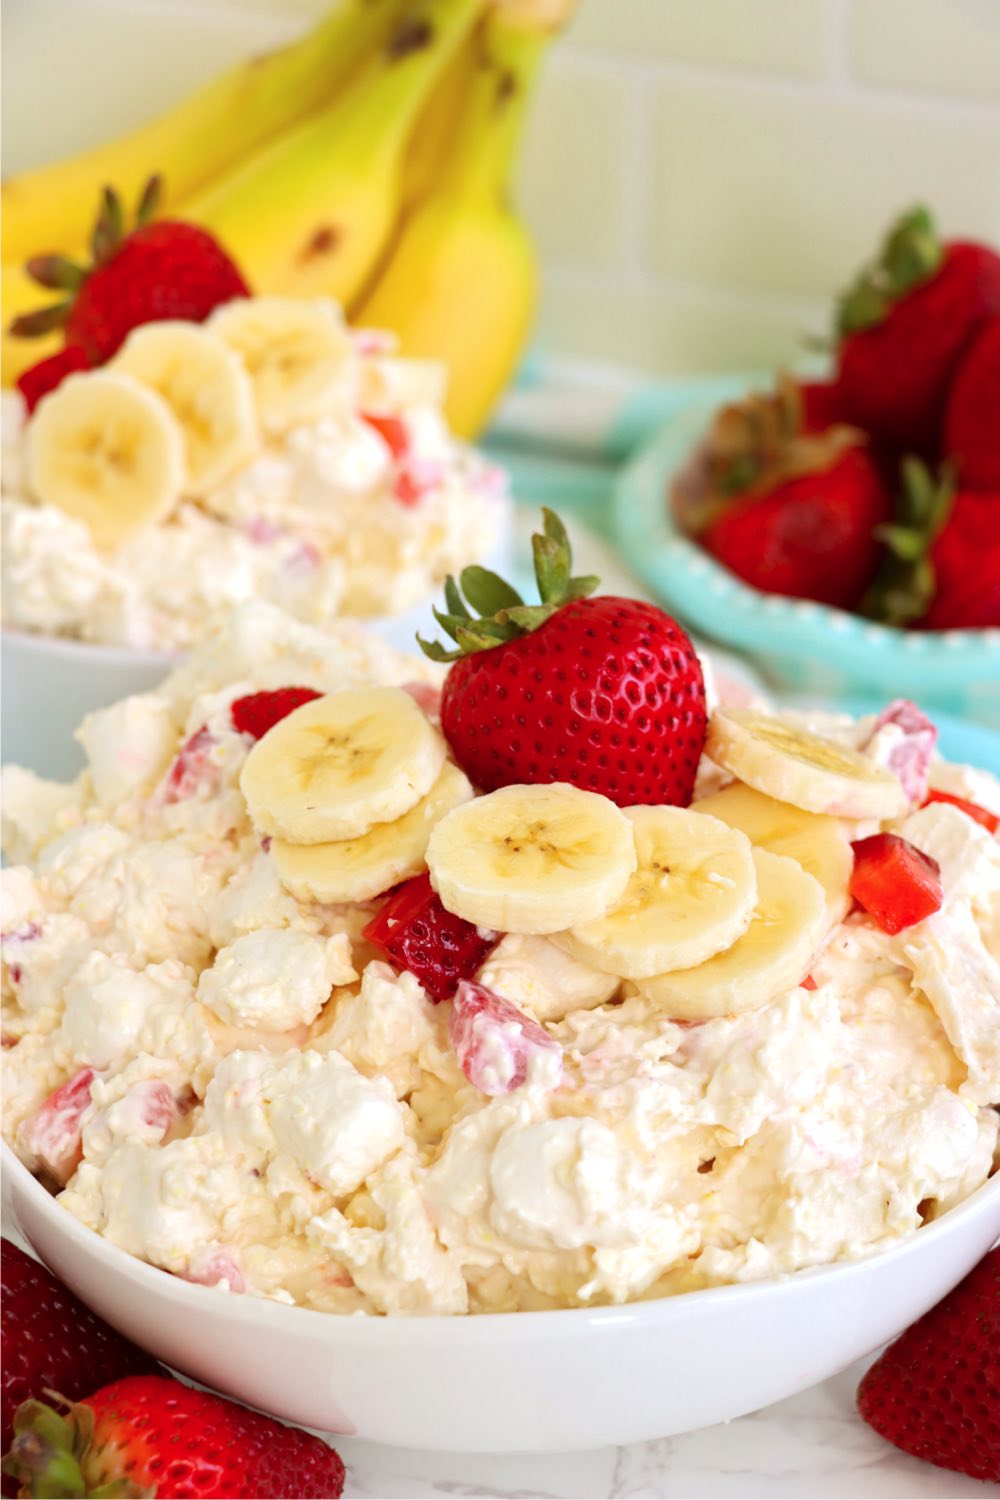 white bowl filled with a fruit fluff salad and garnished with fresh strawberries and sliced bananas.